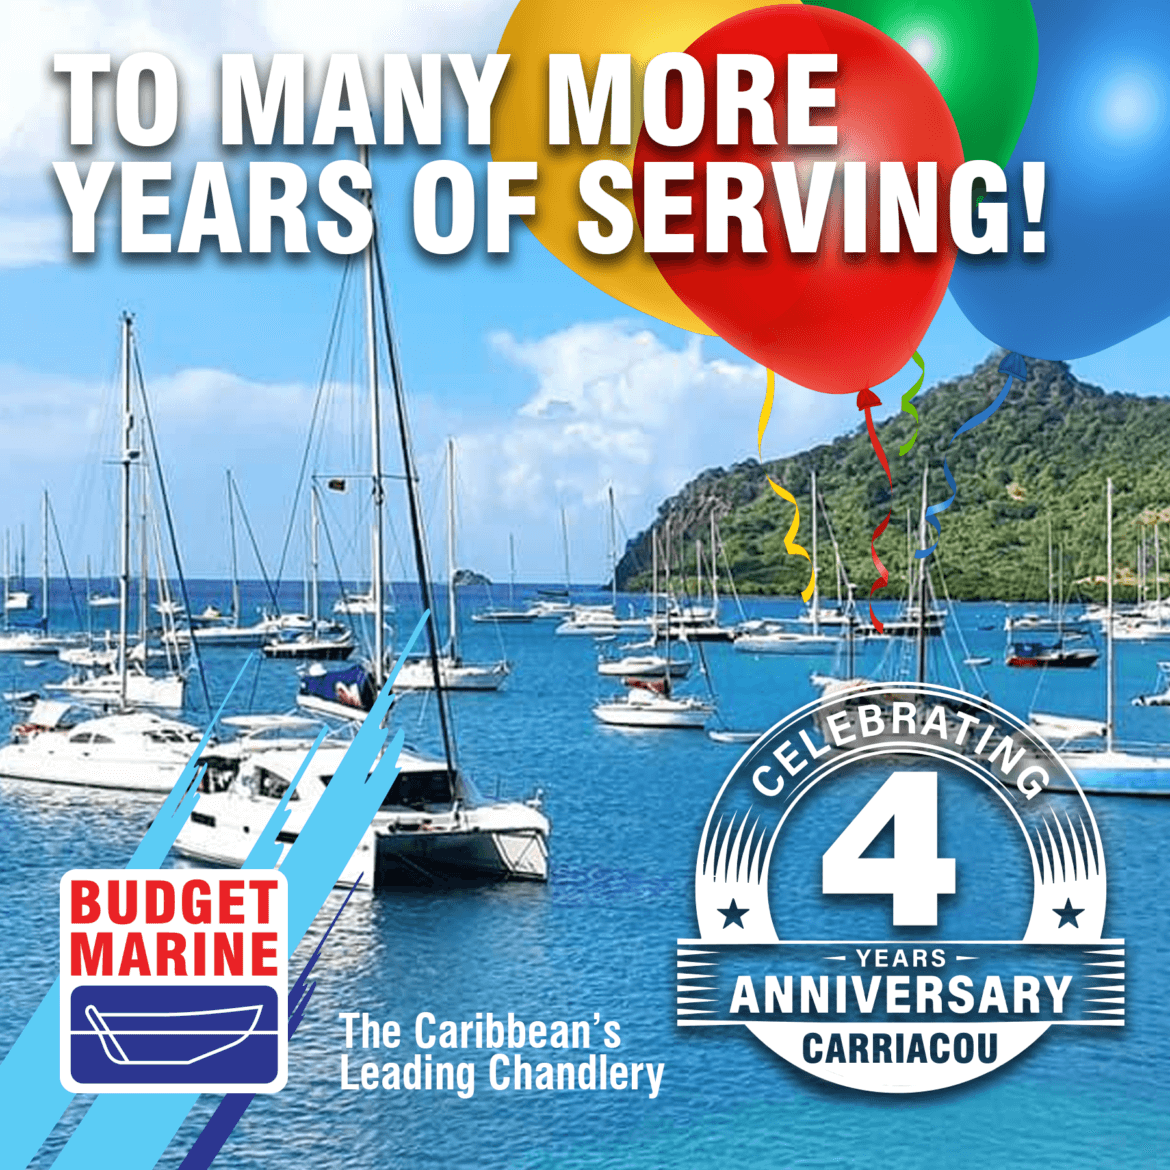 BUDGET MARINE CELEBRATES 4 YEARS IN CARRIACOU 1